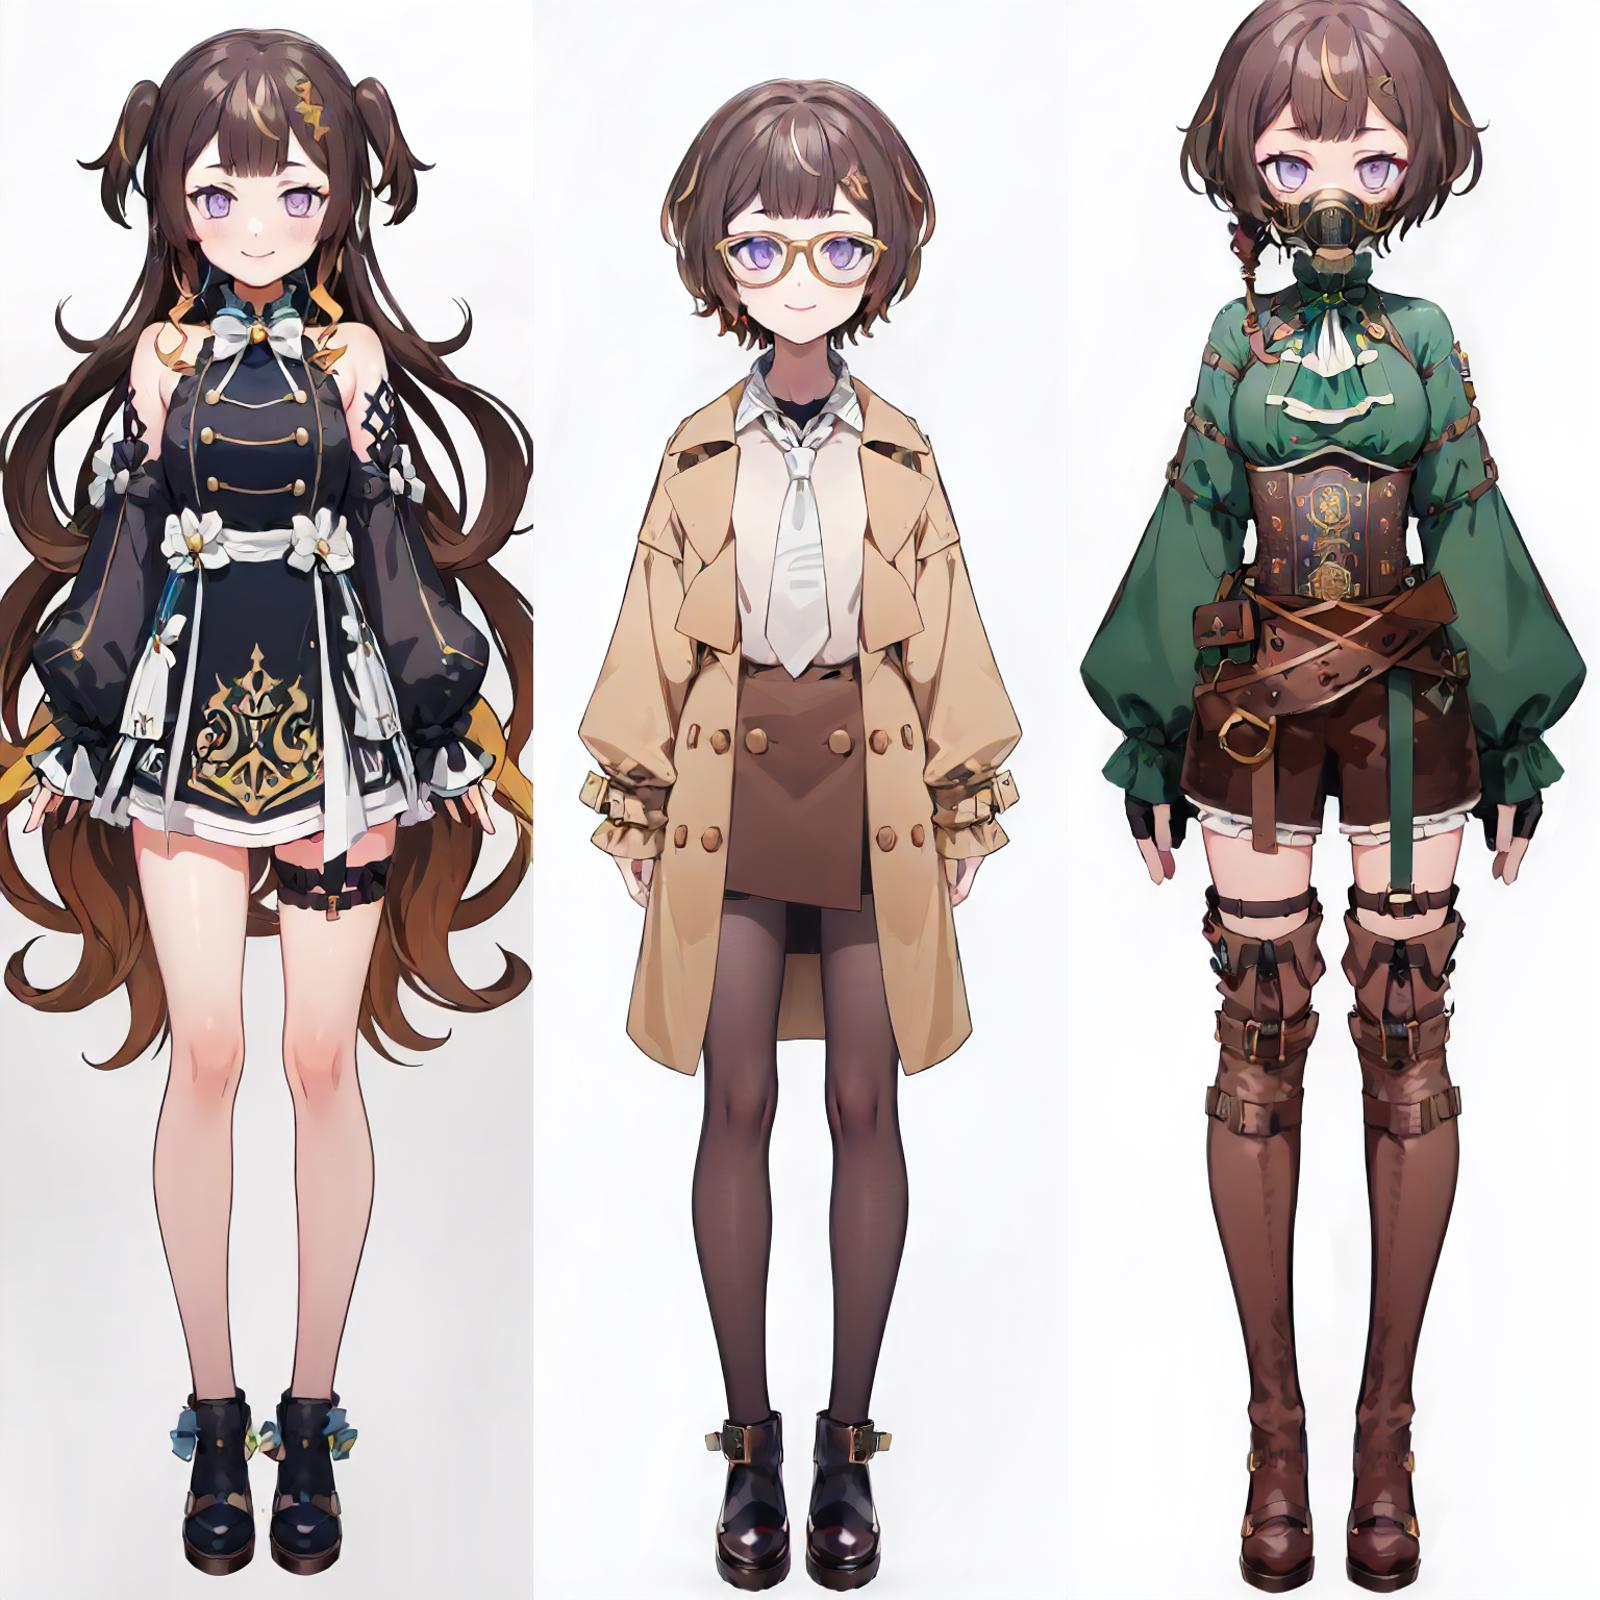 Anya Melfissa (Hololive) 3 outfits image by holostrawberry